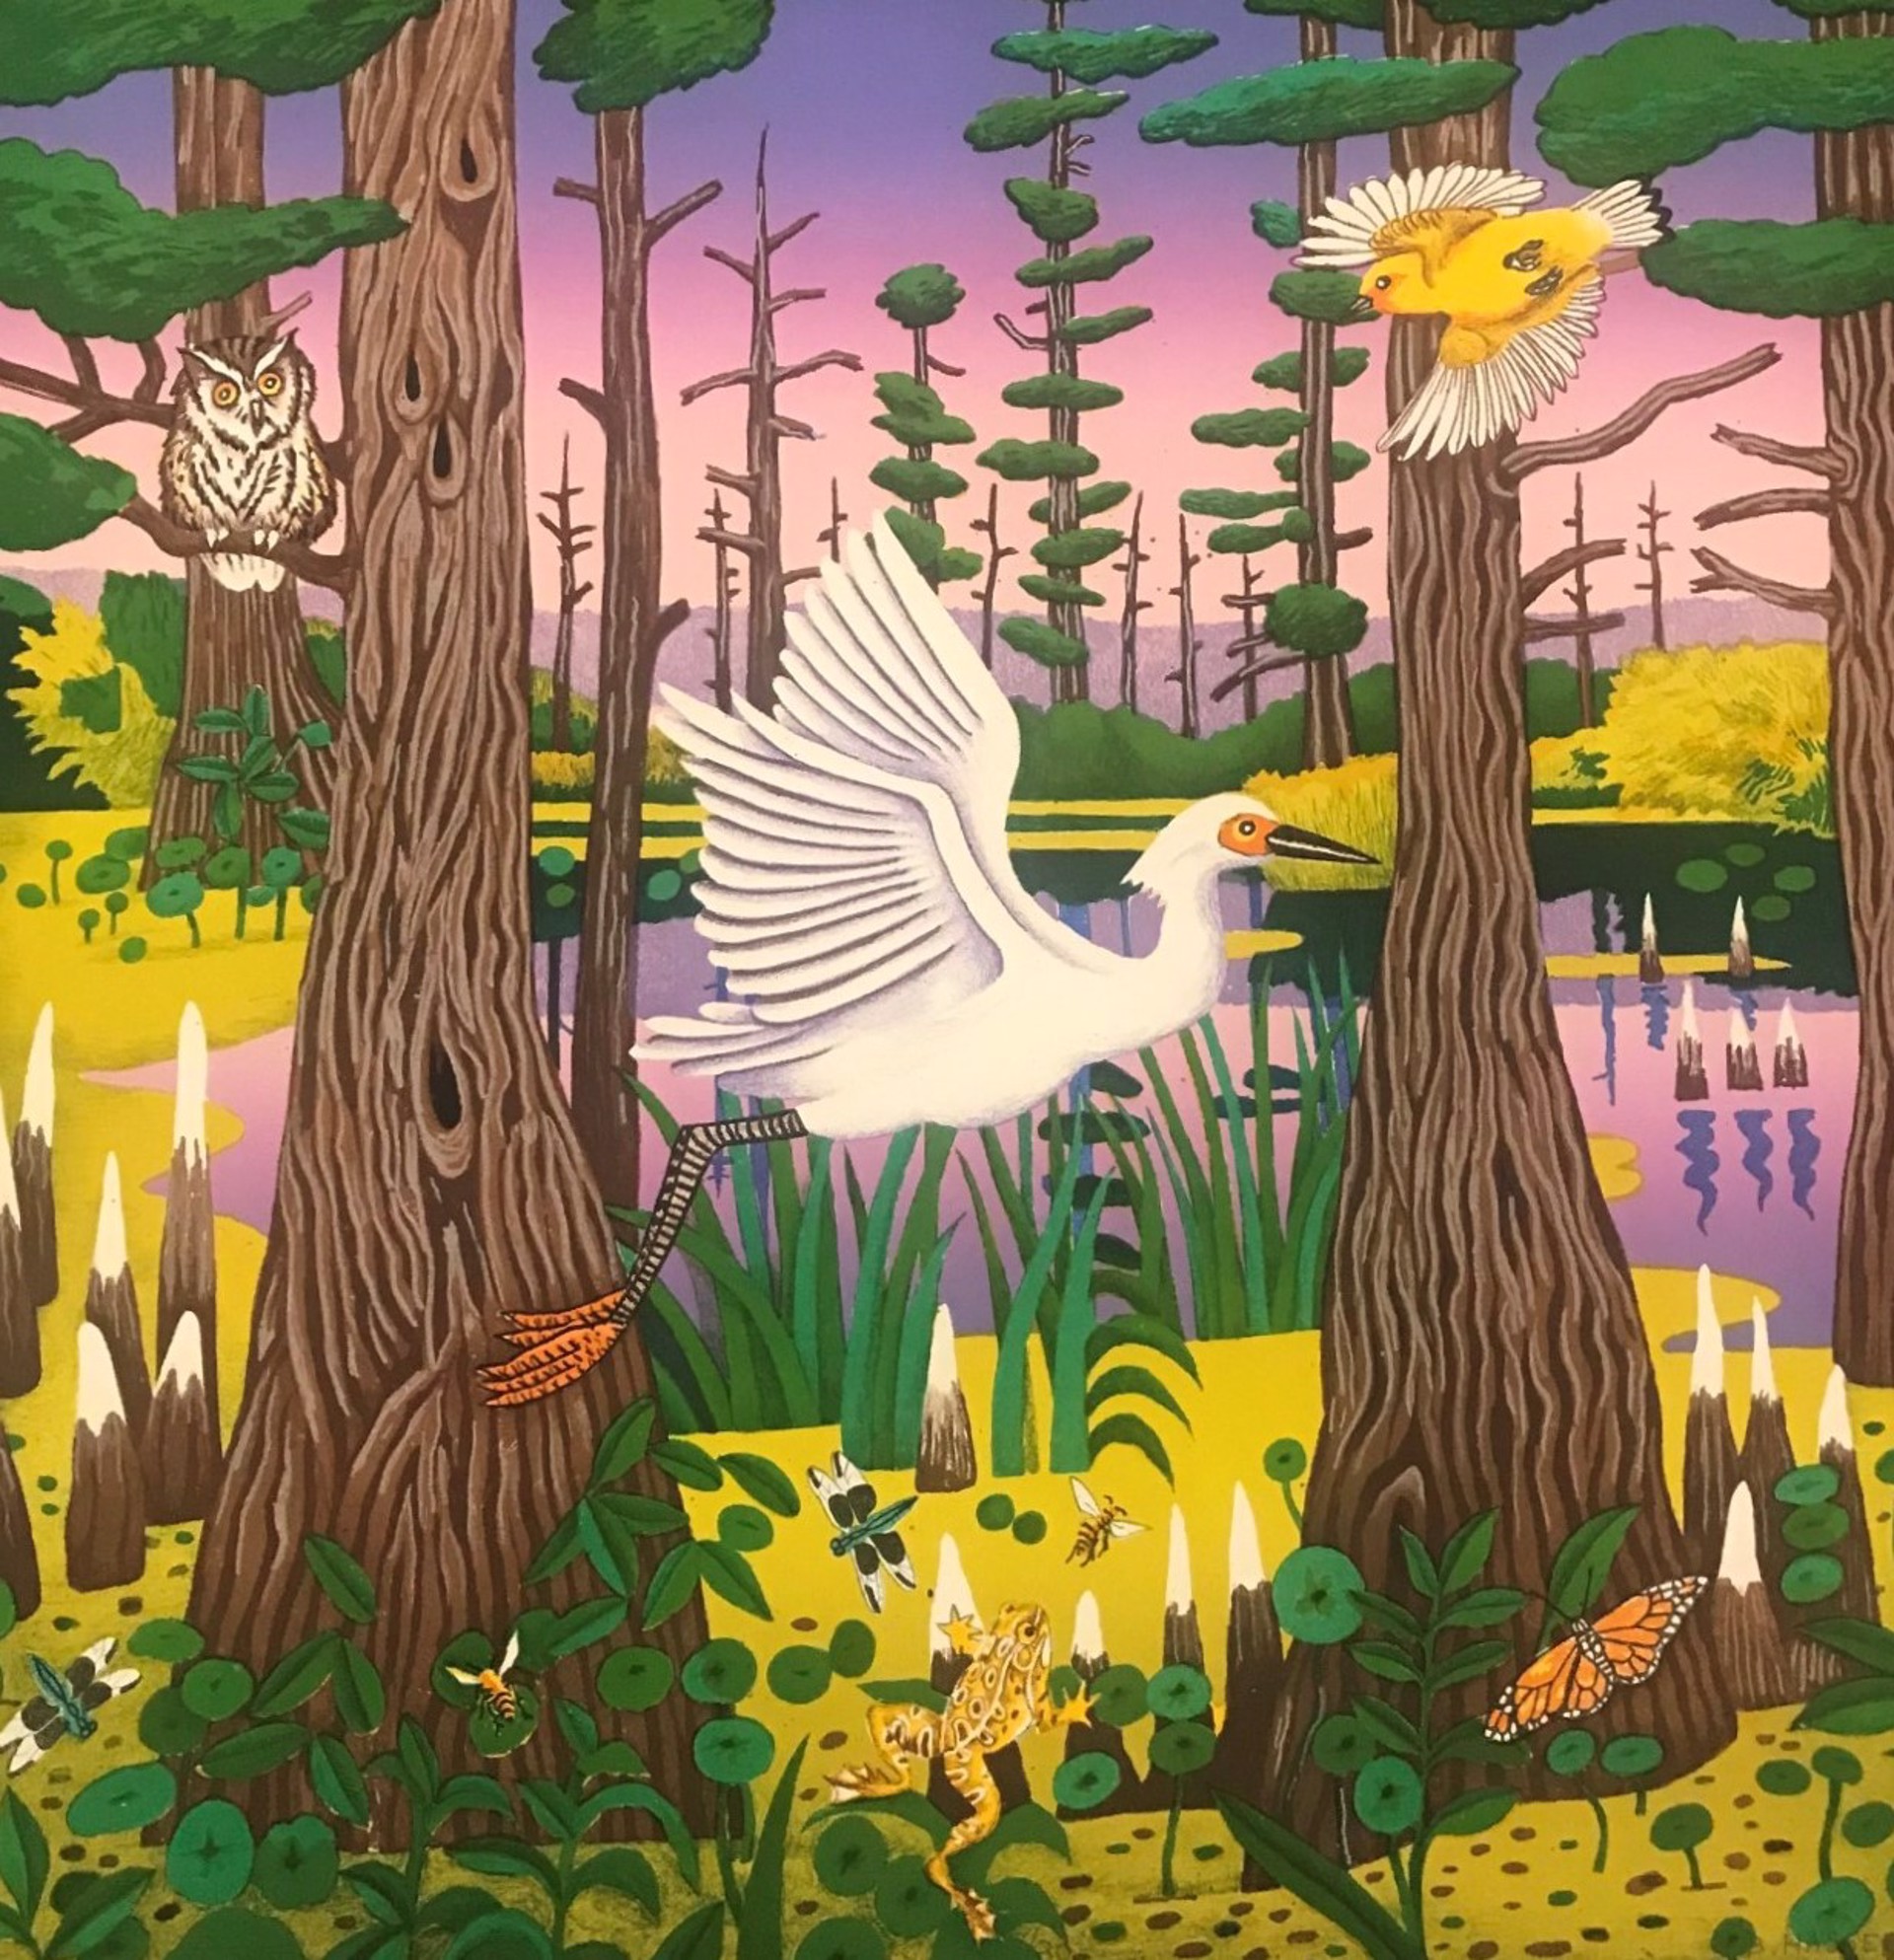 Egret, Grassy Lake by Billy Hassell